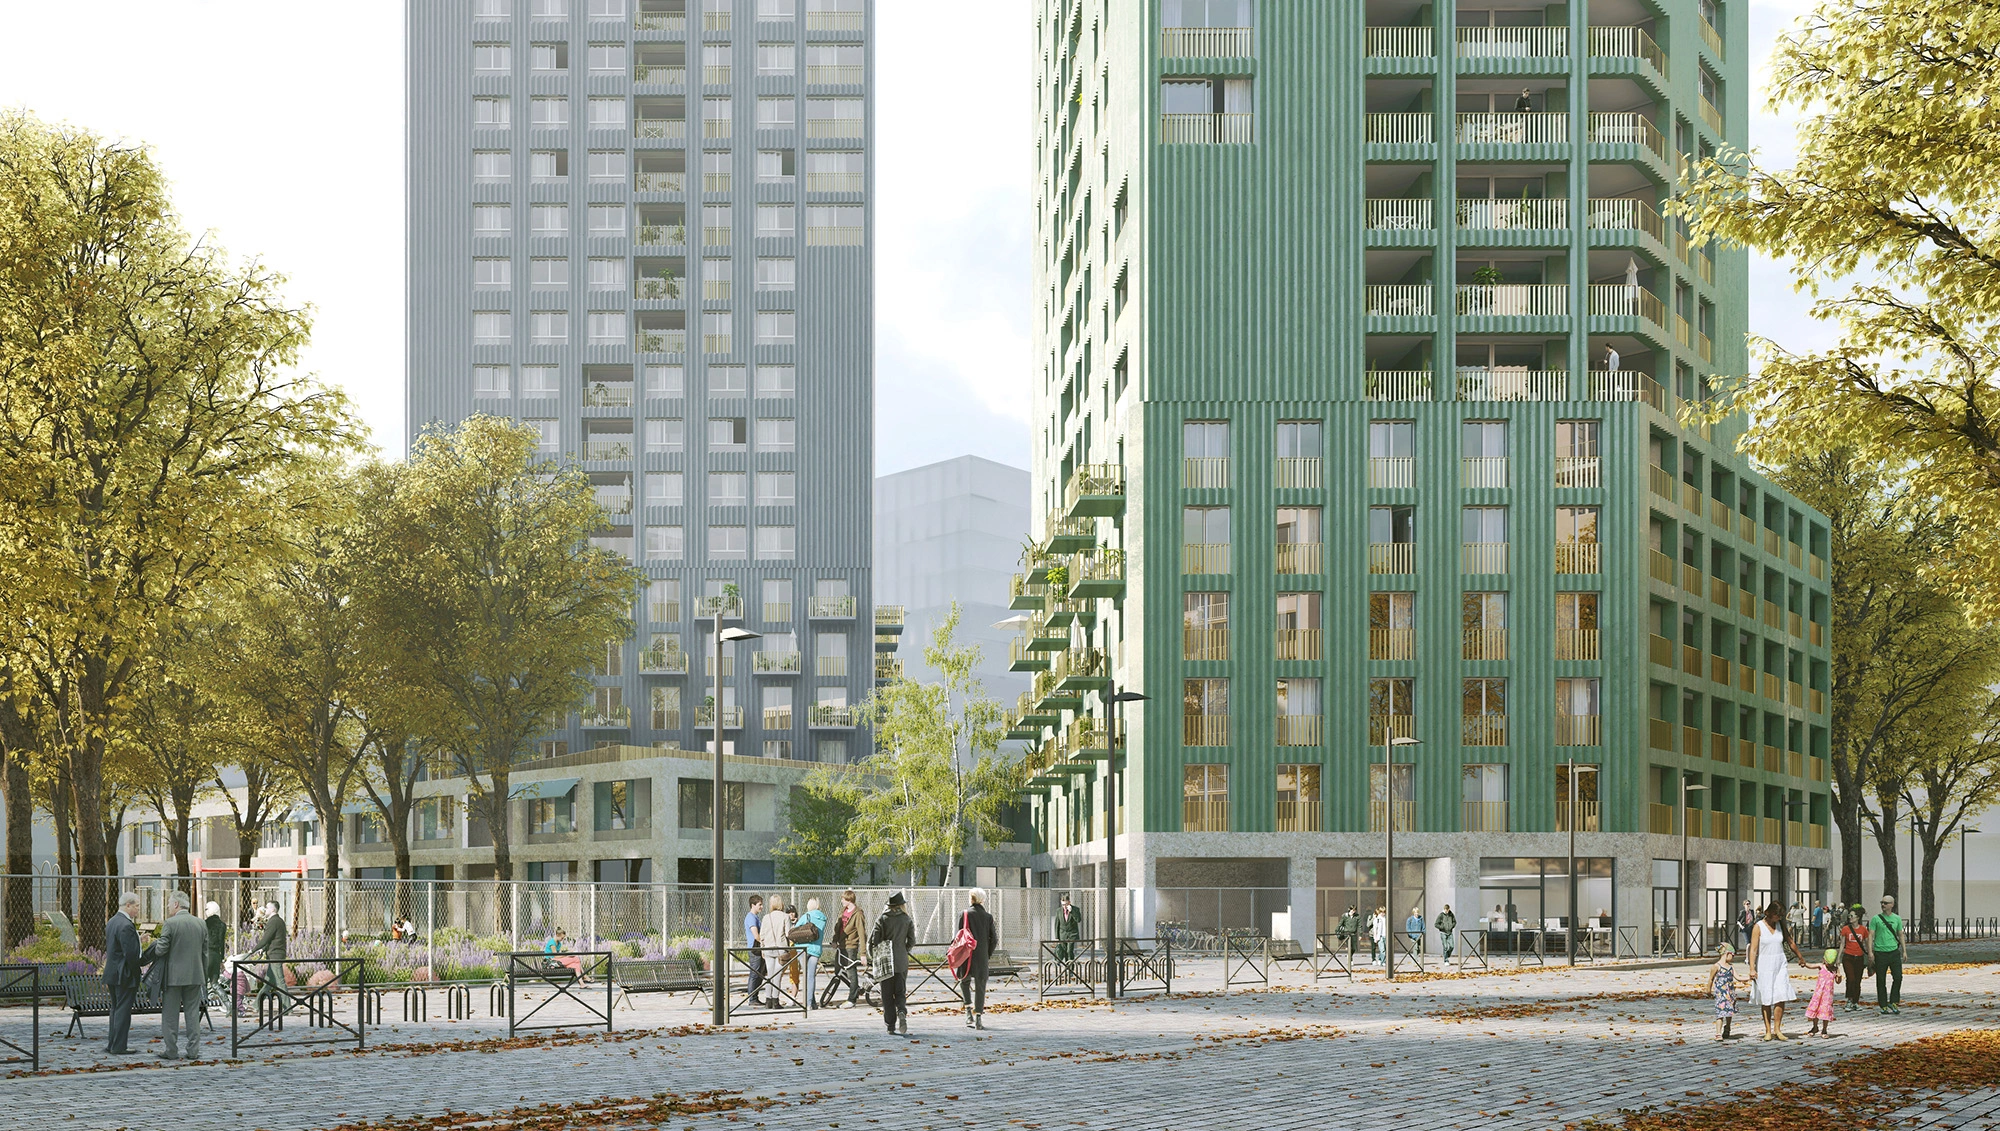 COLLECTIVE HOUSING UNITS - CHAPELLE INTERNATIONAL